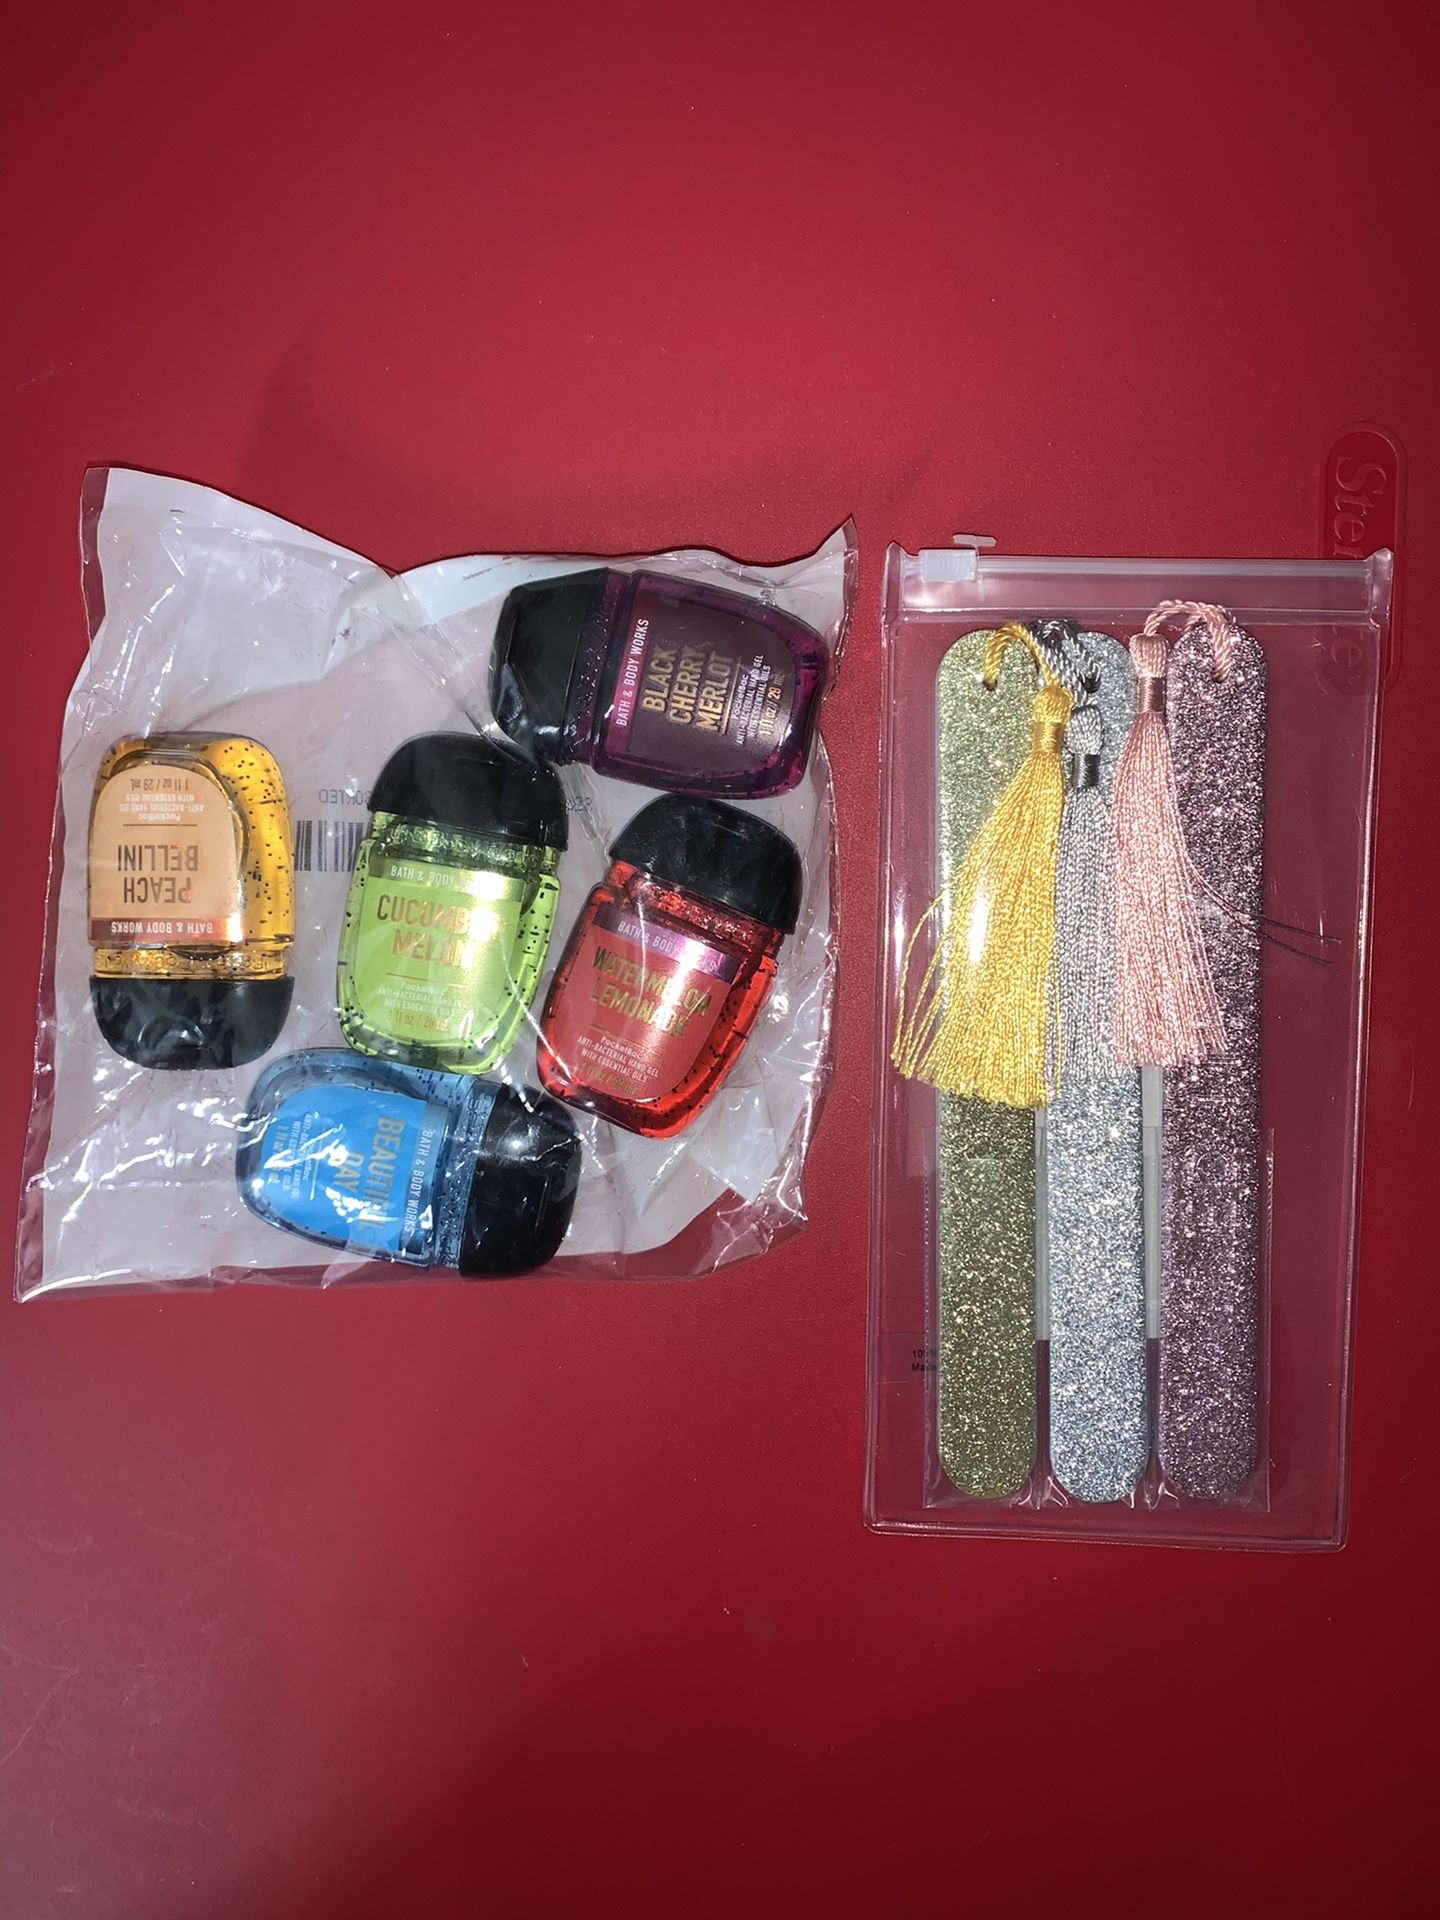 Bath body works + Macy’s 3 Glitter Nail Files With Tassels. Beauty Bundle. No pick up. Only Shipping. Fast Shipping. ( Not selling separately)